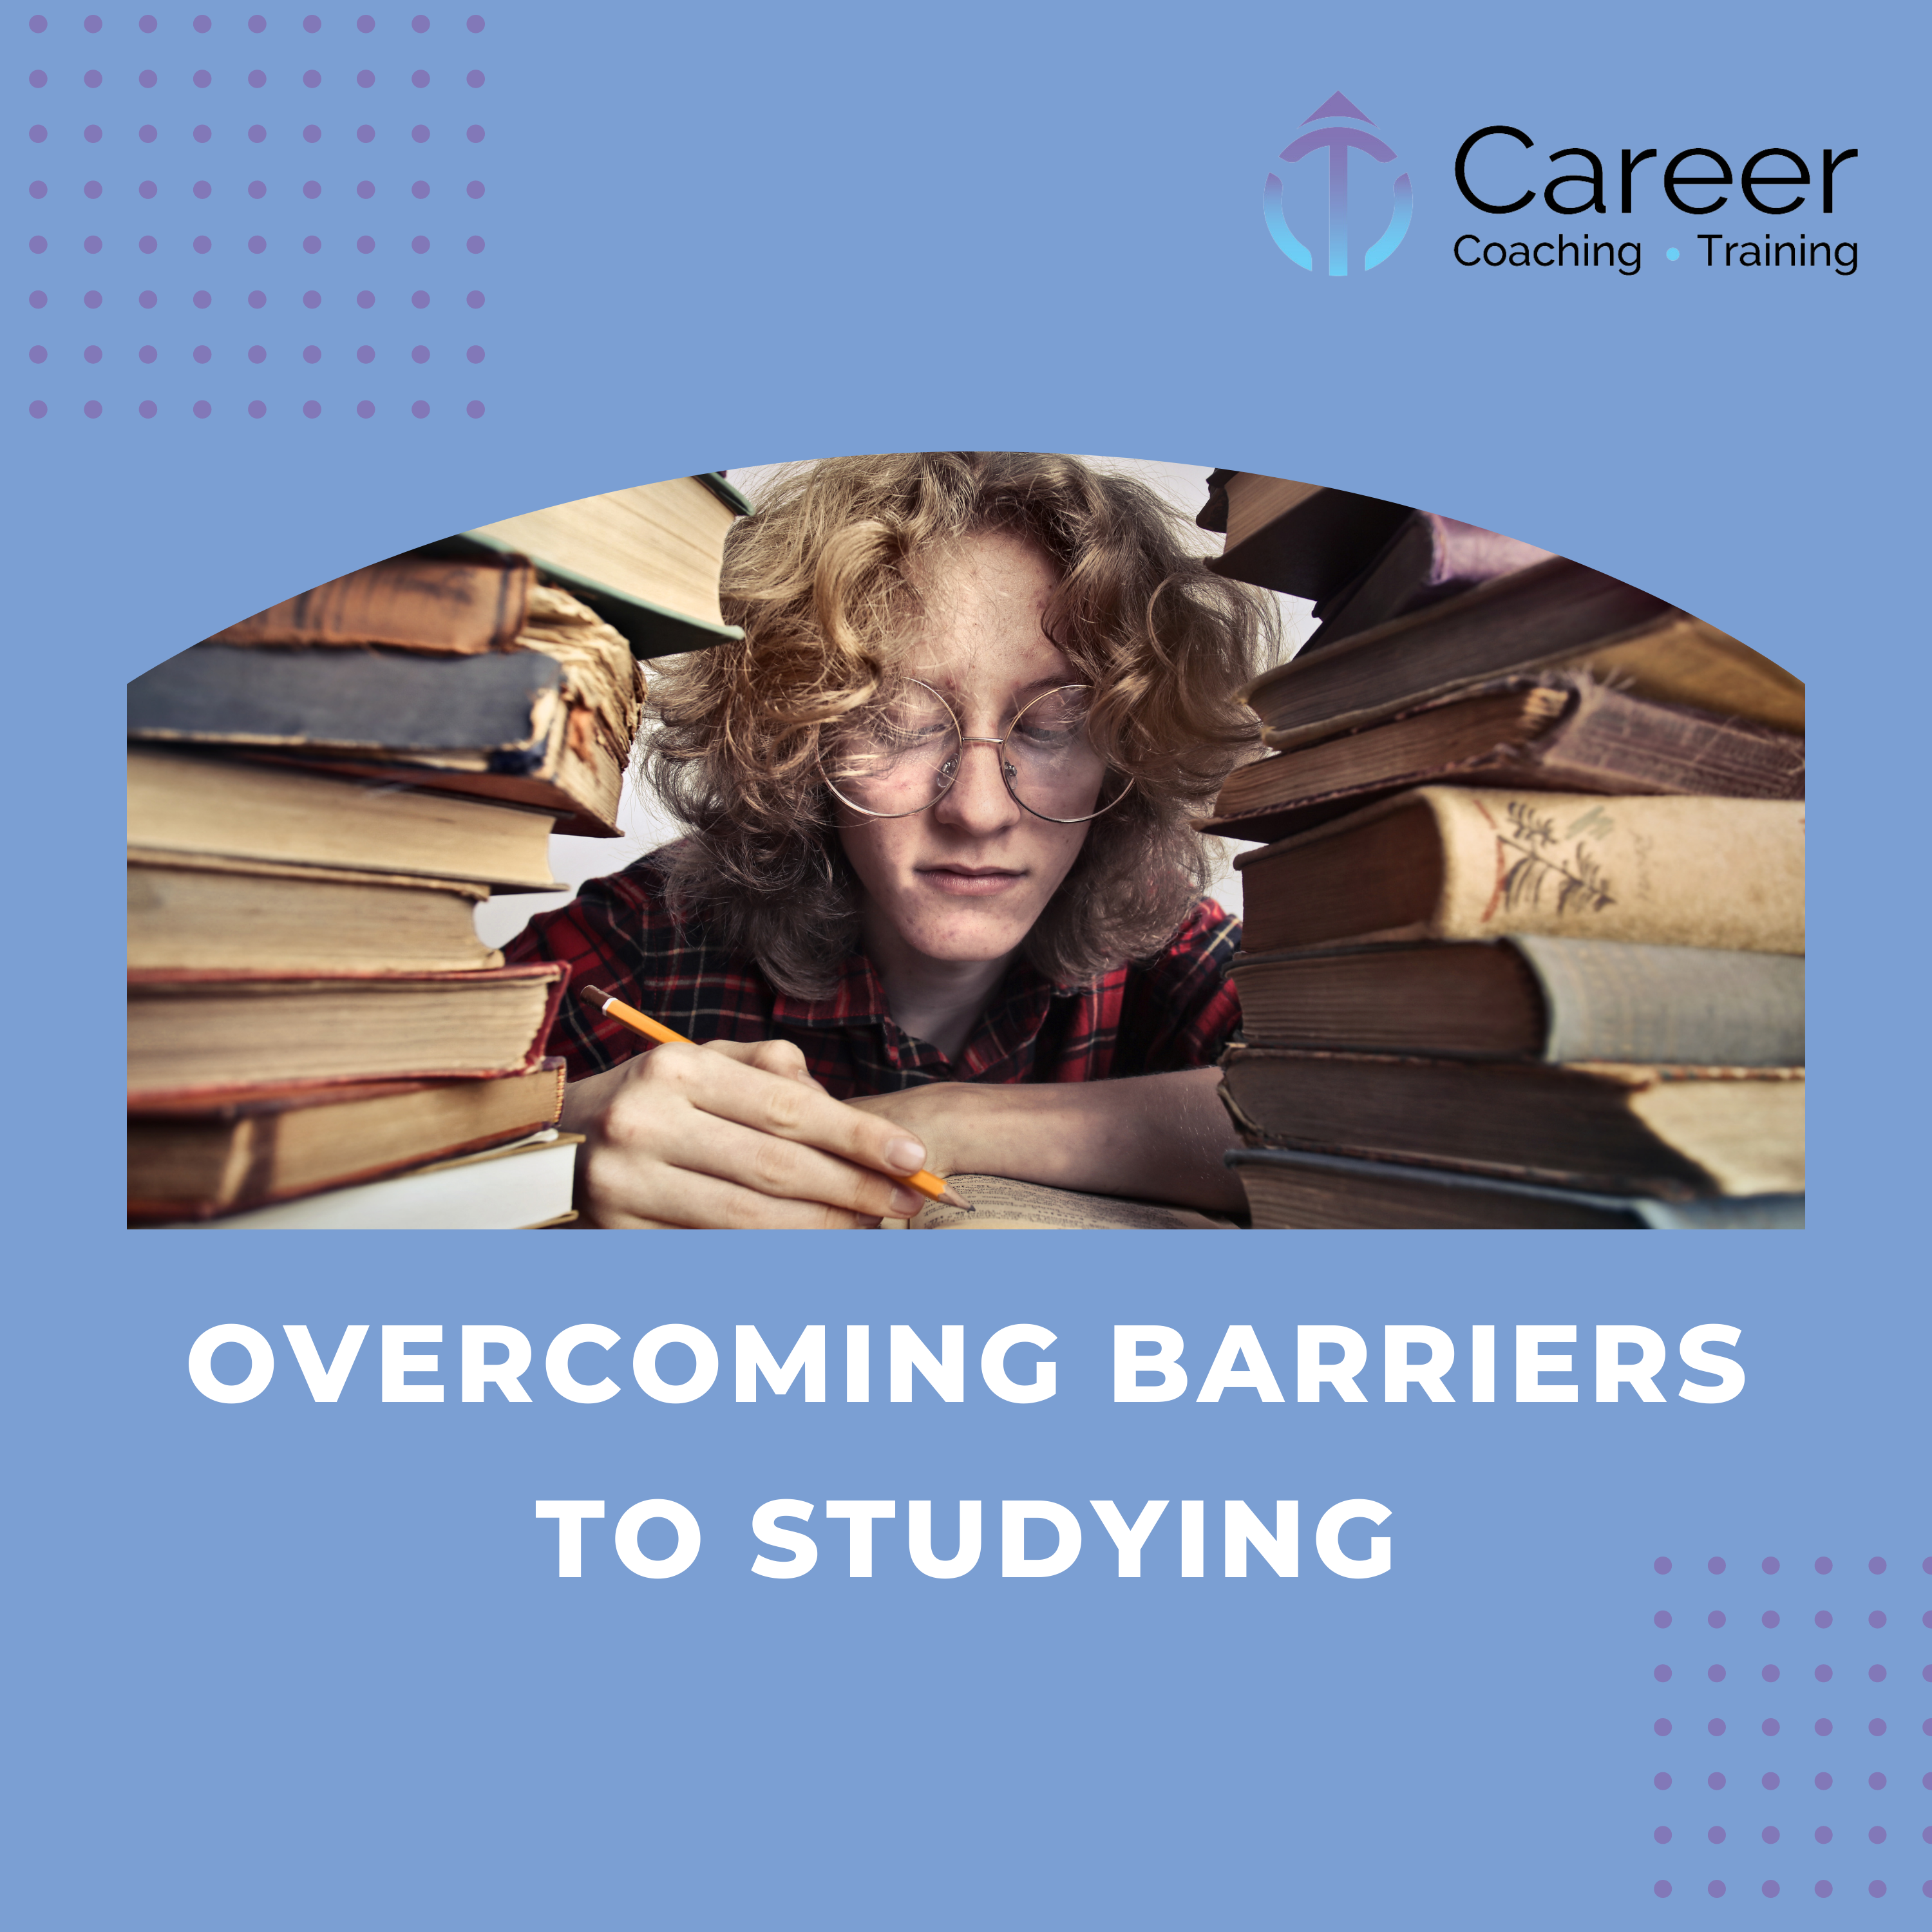 Overcoming Barriers to Studying